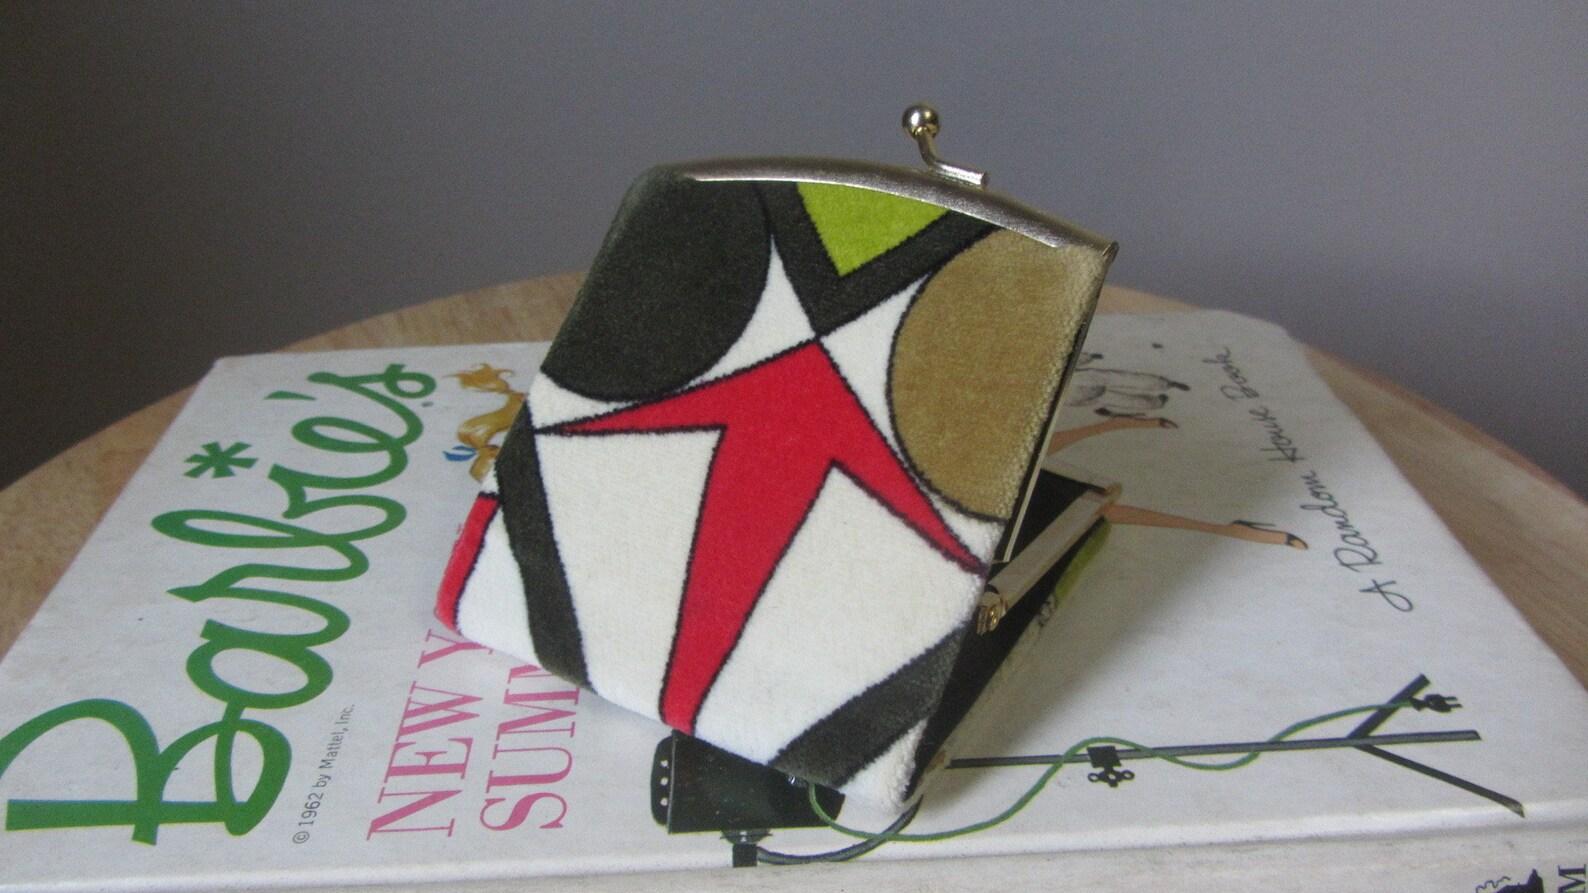 vintage Emilio Pucci coin purse
velveteen multi colored Pucci print 
black, cream, red, green and brown
gold metal frame
black silk faille lining
kiss lock closure

✩ A wonderful piece of fashion history! 

Circa 1960s

Markings: gold stamp Emilio